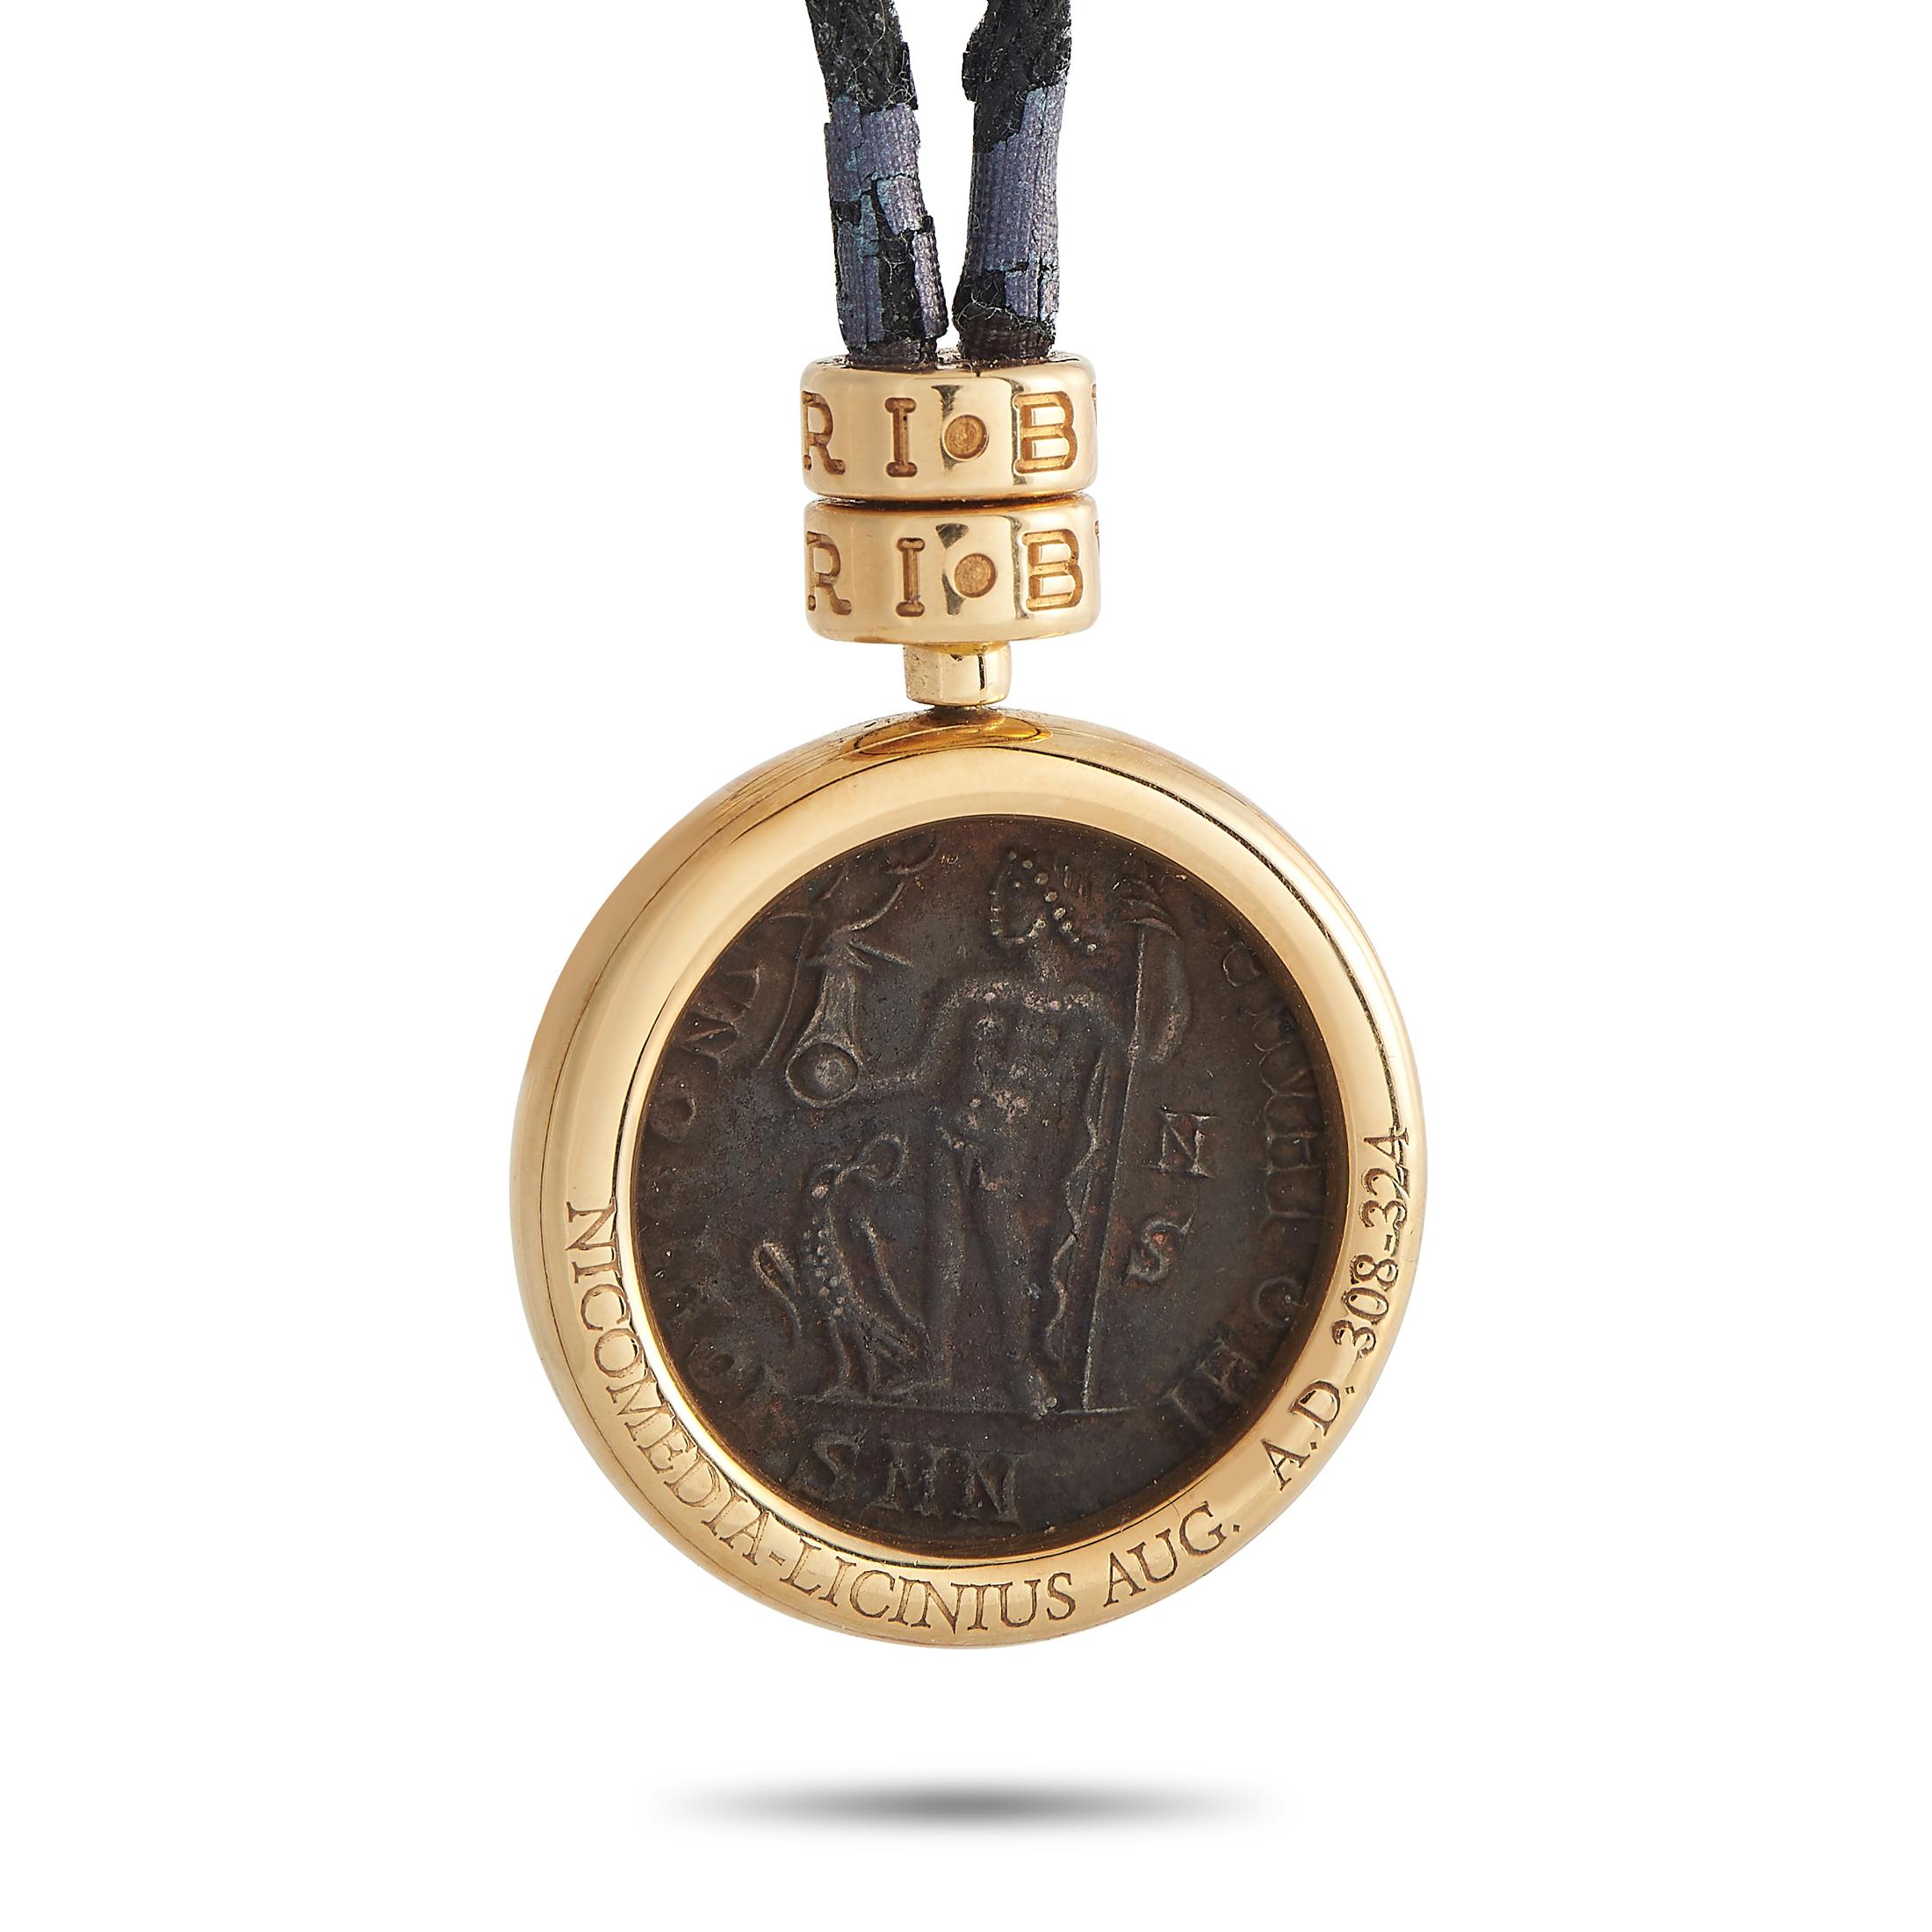 This necklace by the Italian luxury fashion house Bvlgari honors Rome and its history and traditions. It bears an ancient coin set on an 18K yellow gold round frame. The bail and the clasp of the black cord necklace are also crafted in 18K yellow